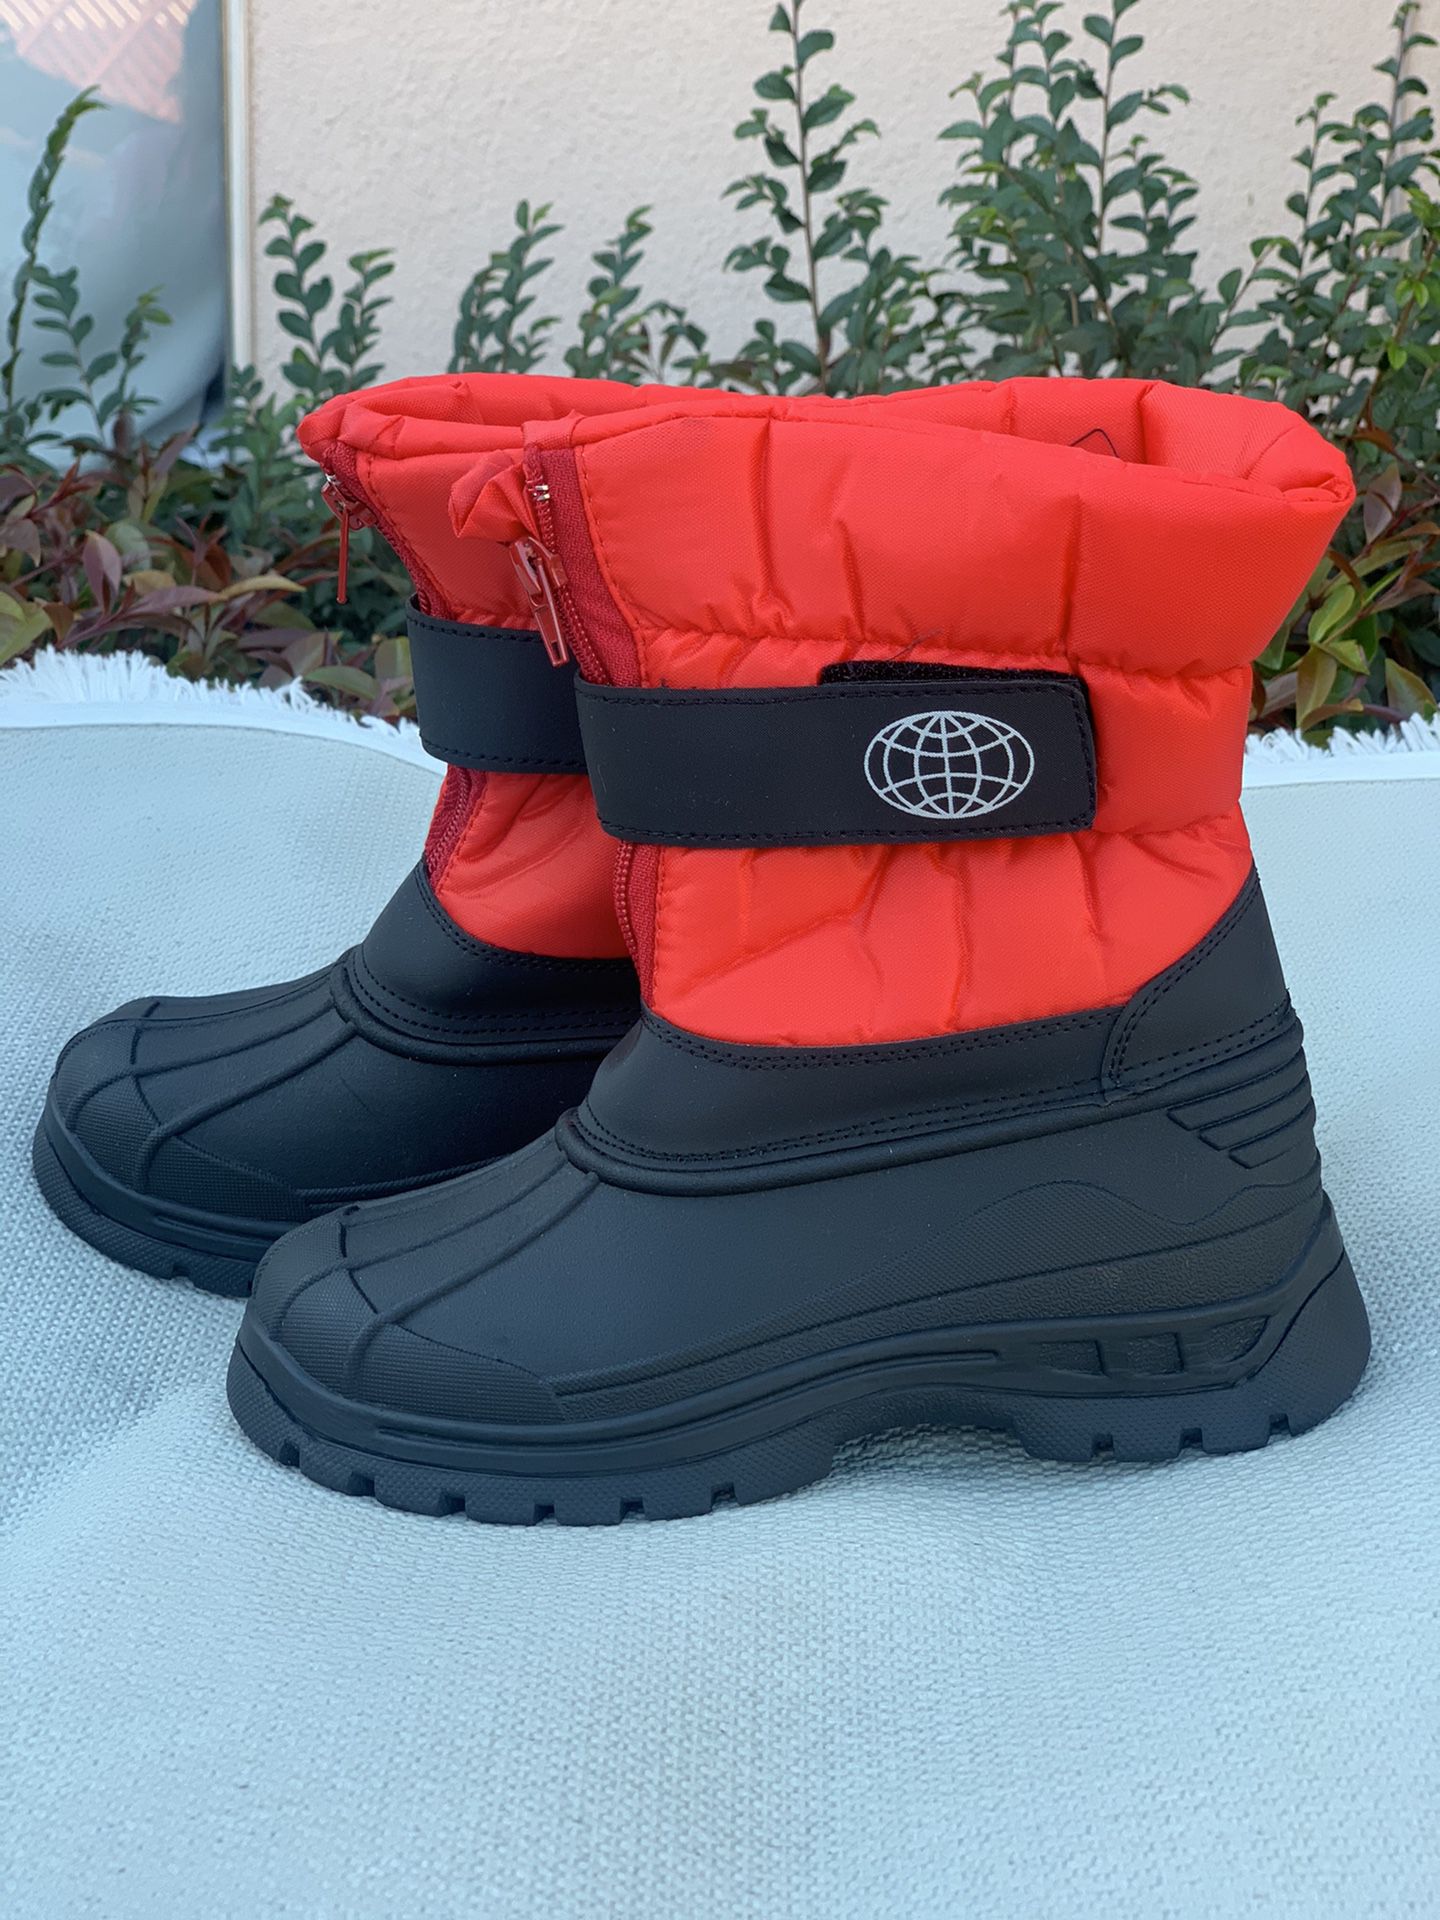 Snow boots for kids sizes 1,2,3,4